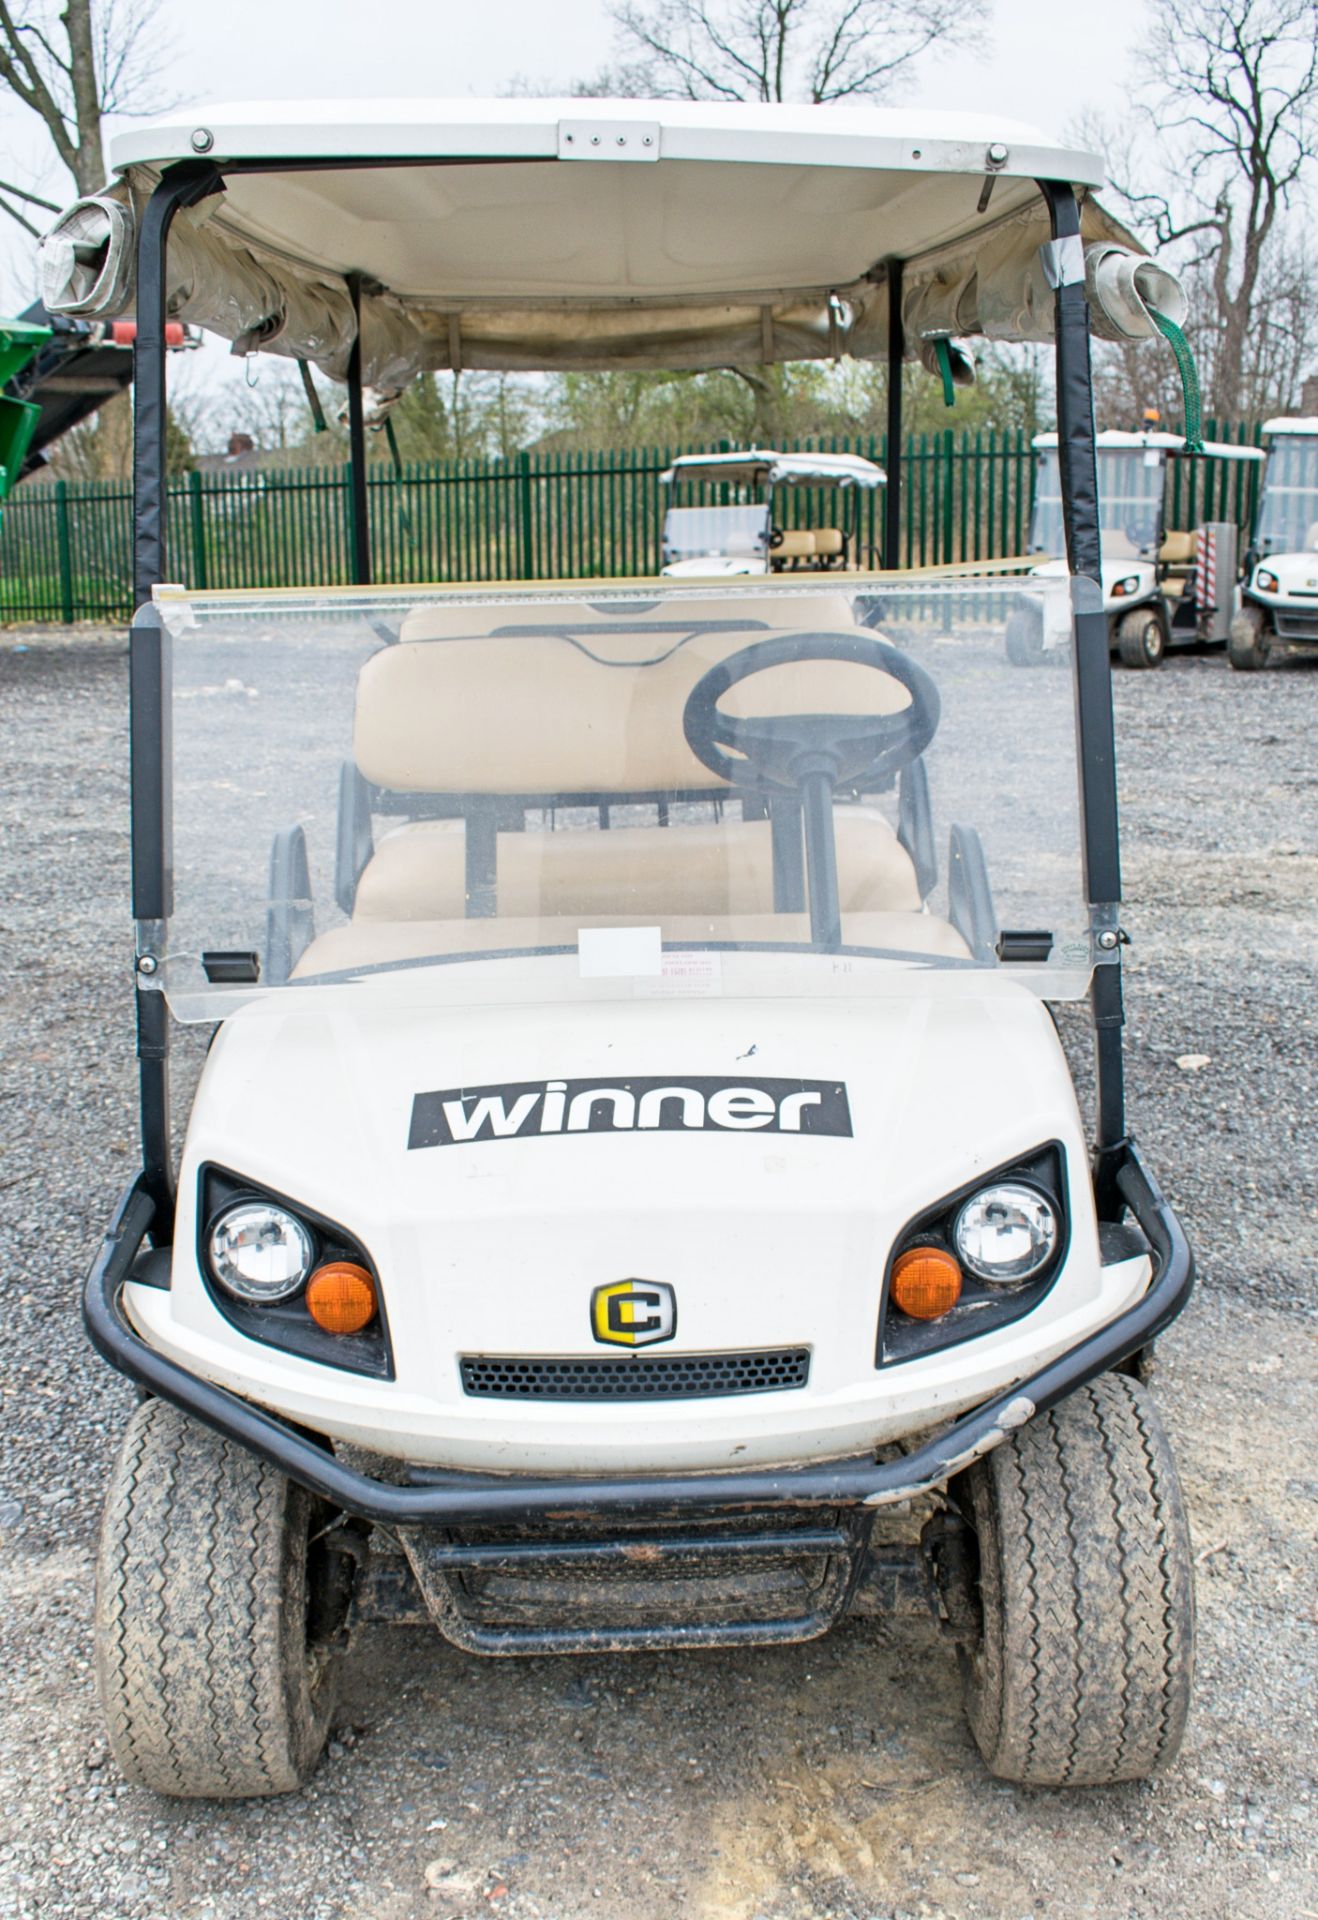 Cushman 6 seat petrol driven golf buggy Year: 2012 S/N: 281245 Recorded Hours: 0184 - Image 5 of 8